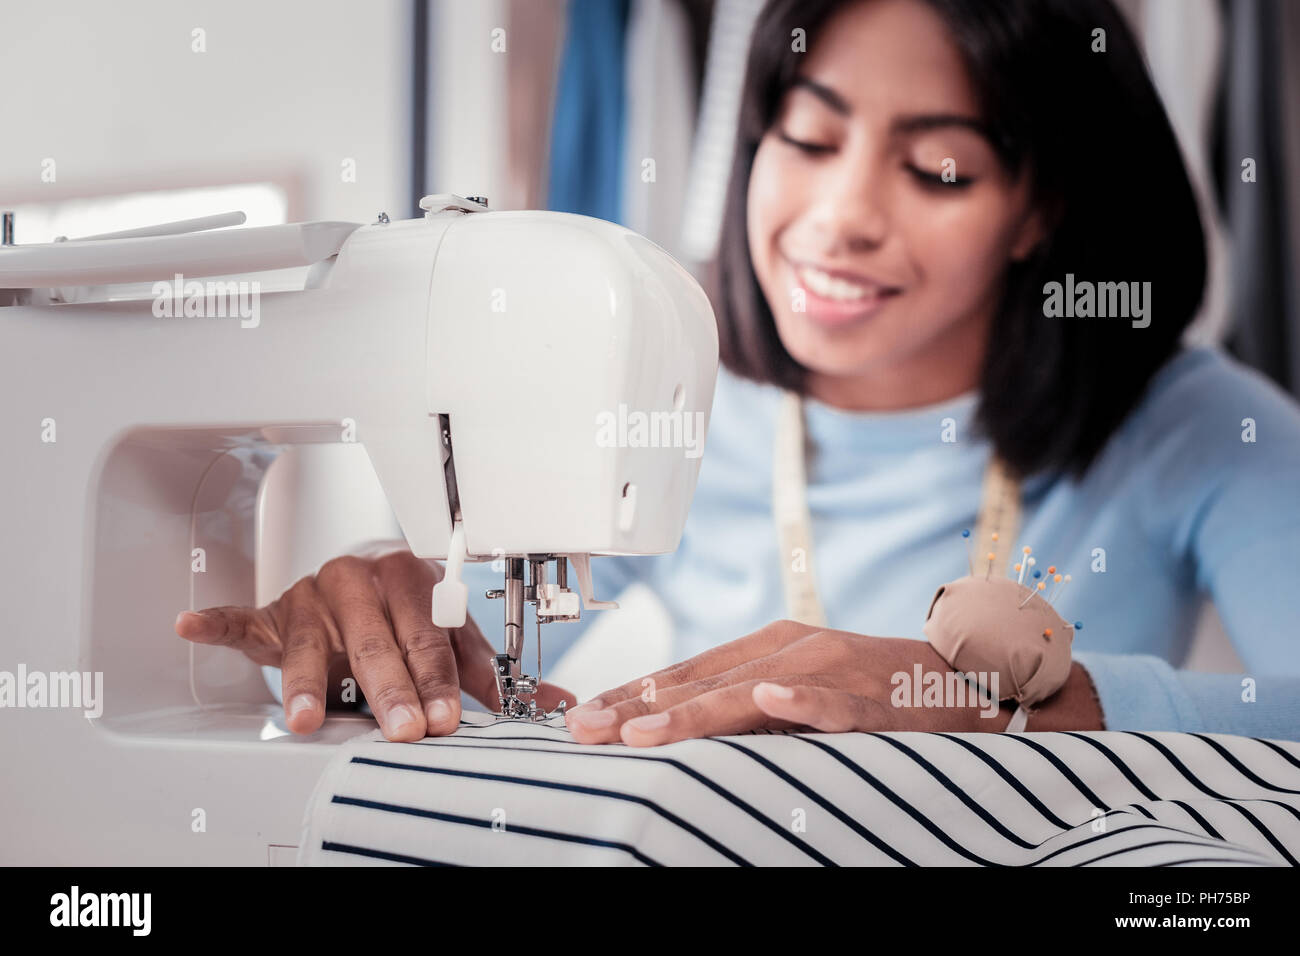 Close up of sewing machine being used by skilled tailor Stock Photo